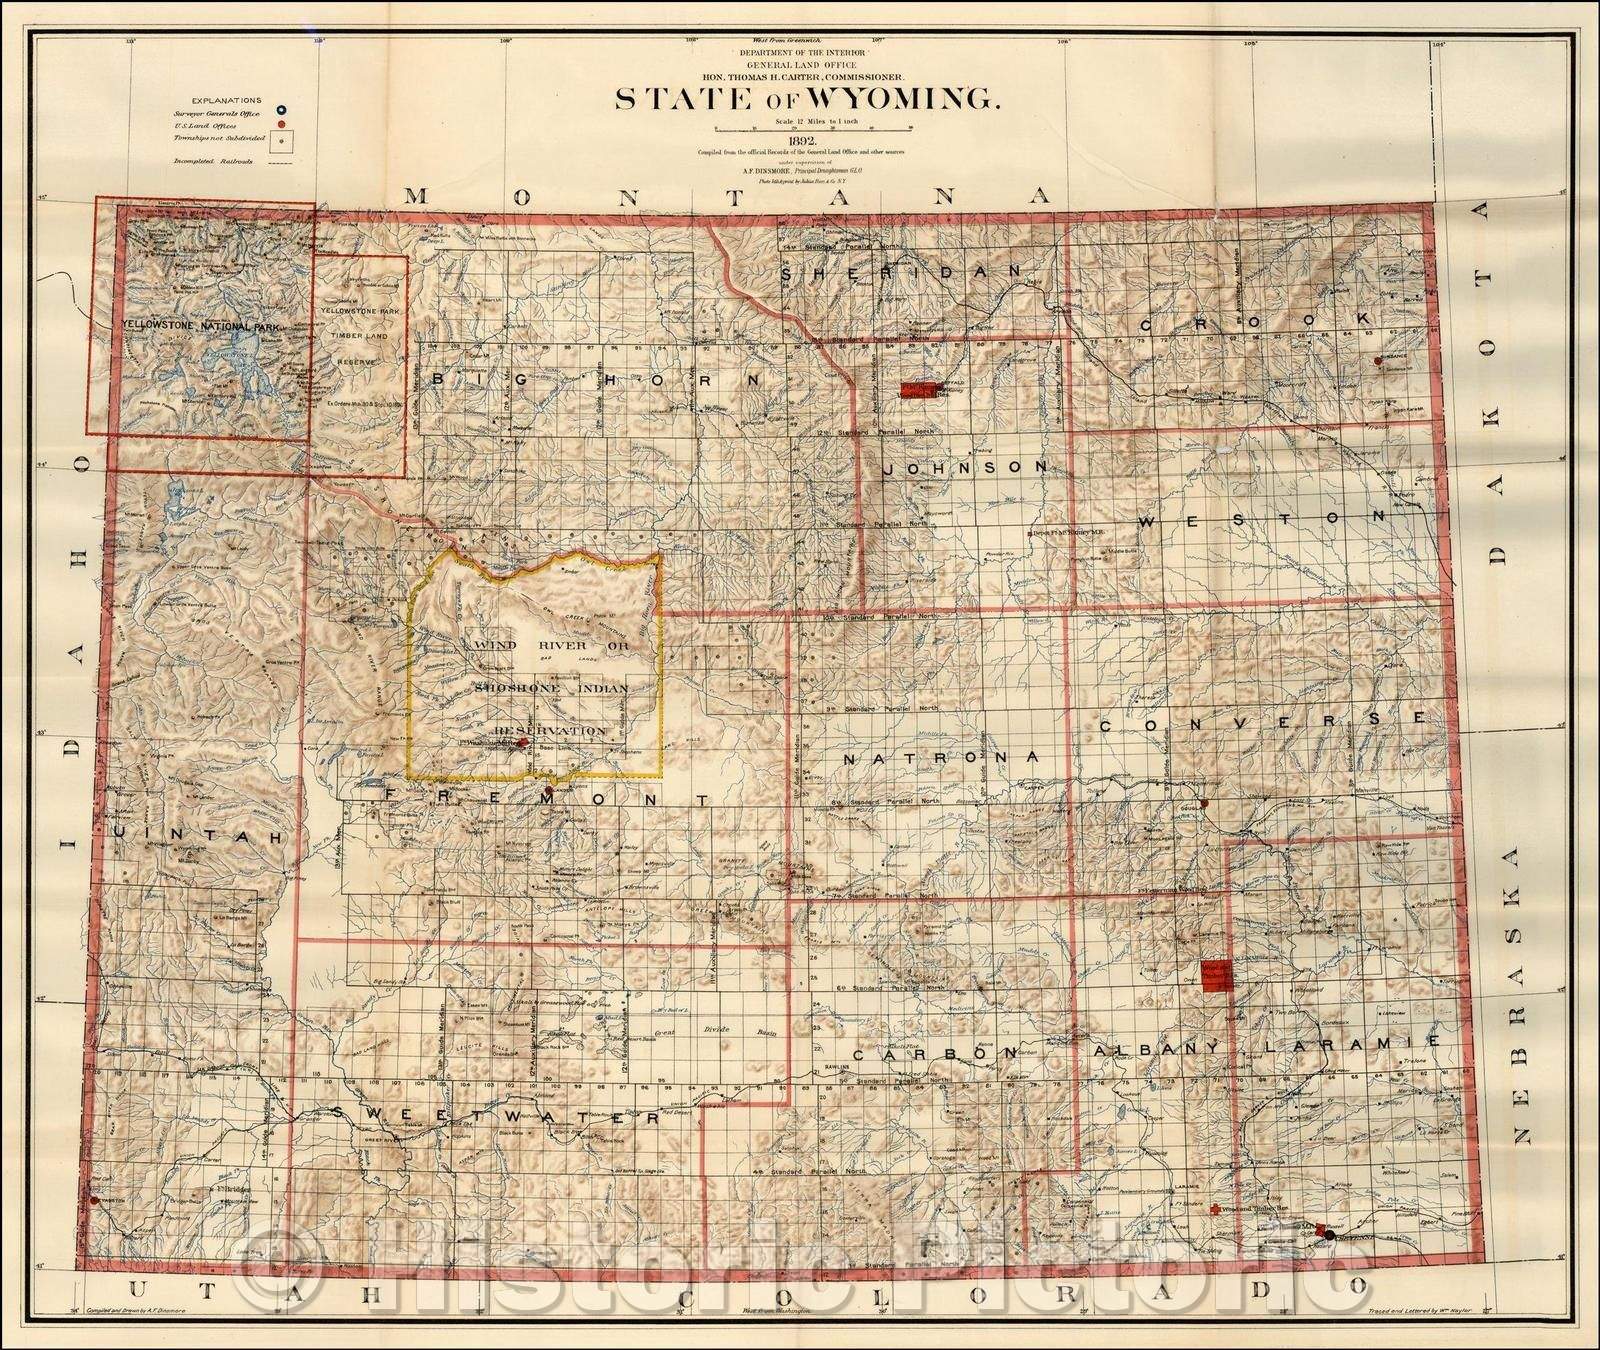 Historic Map - State of Wyoming, 1892, General Land Office v1